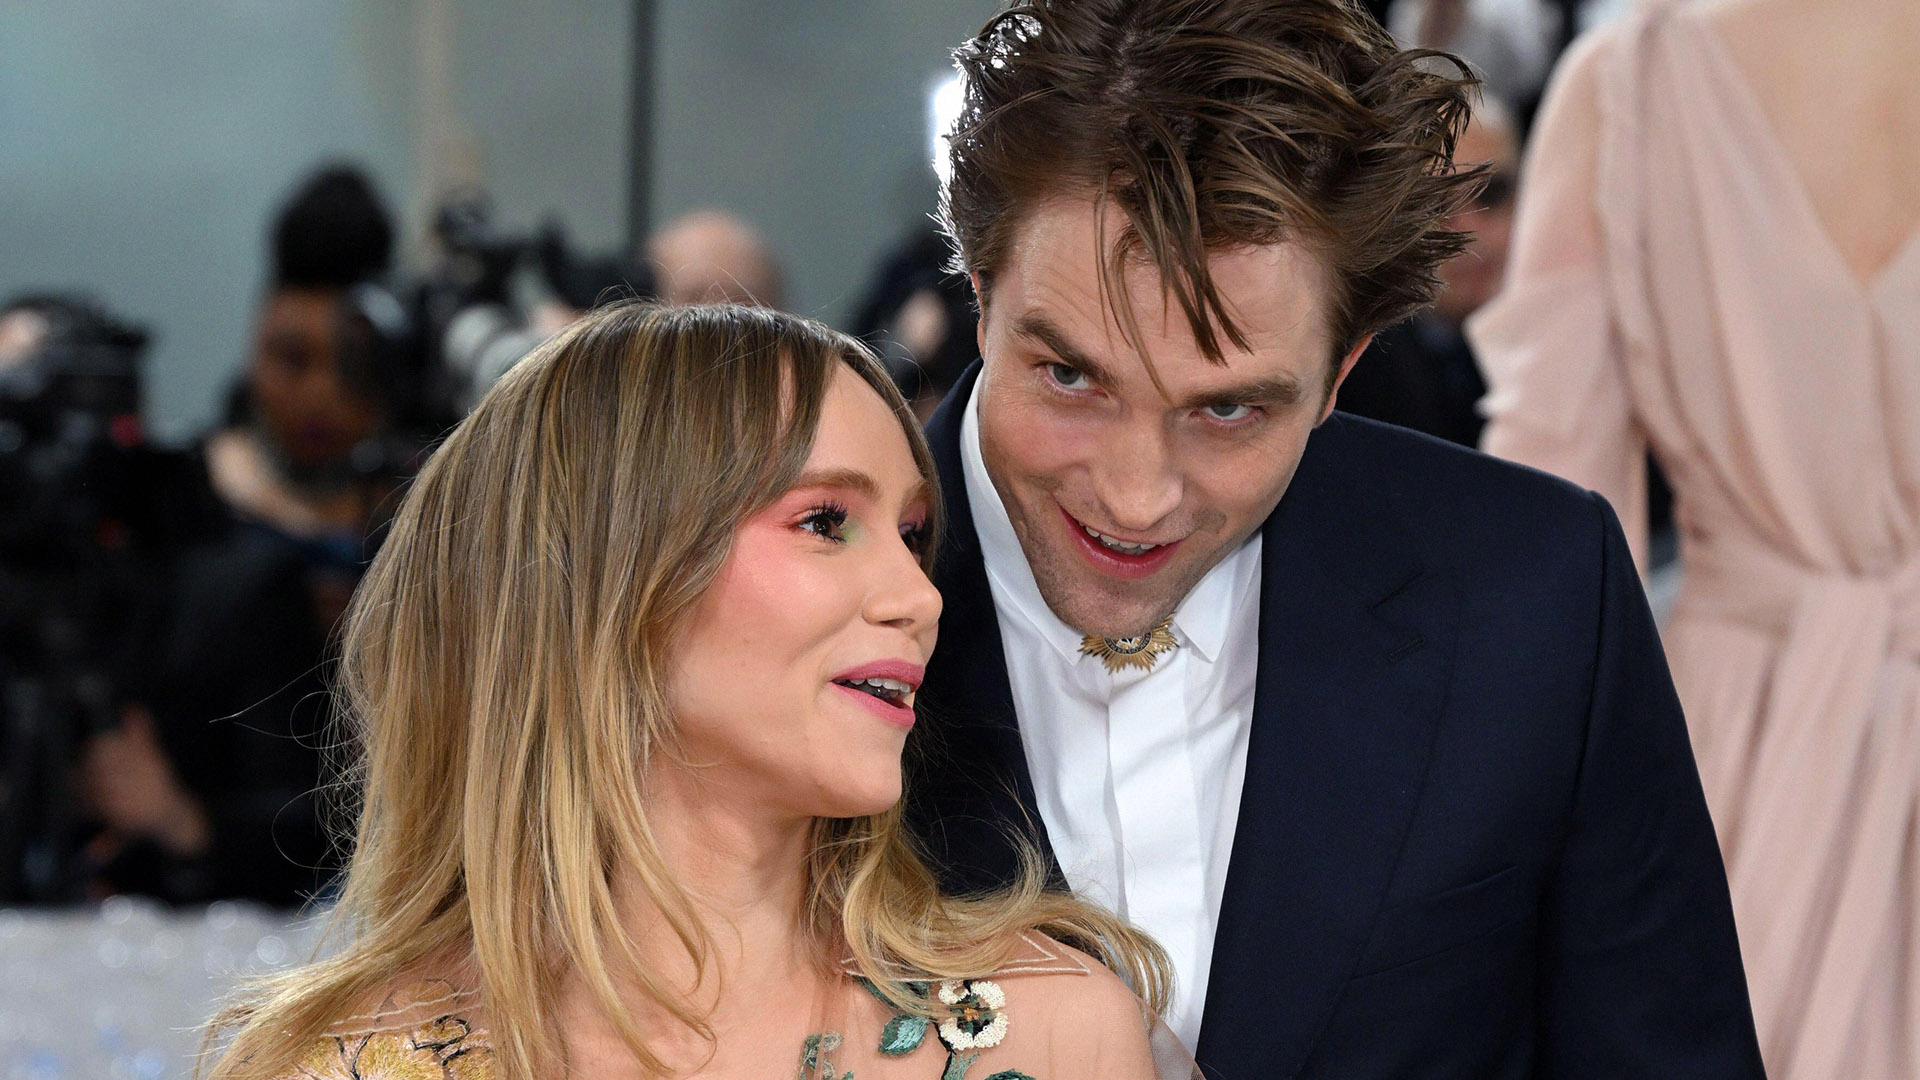 Ultimate 'Aww' Moment: Robert Pattinson's Adorable Support for Suki Waterhouse